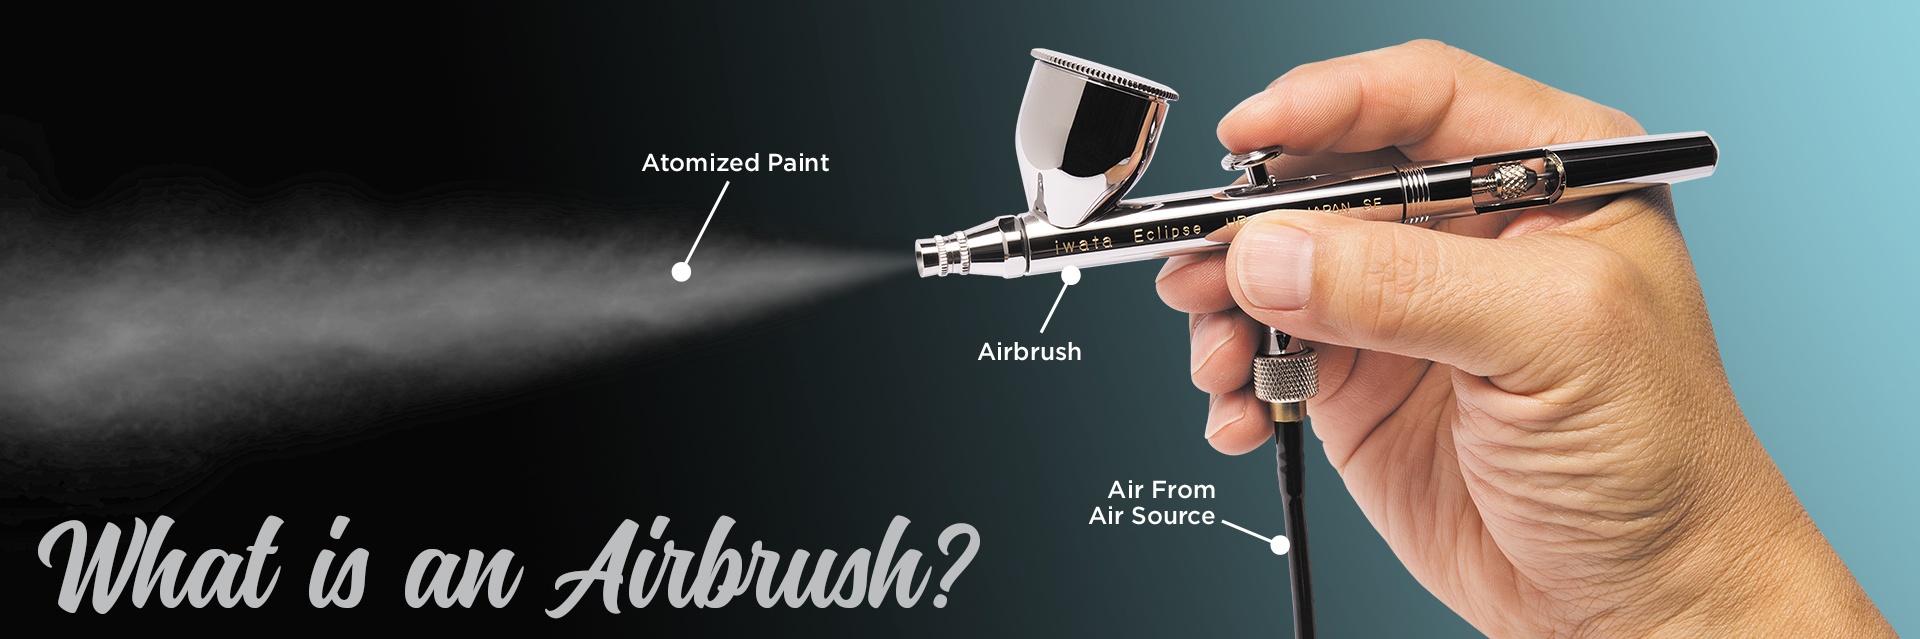 First time airbrusher looking for my first airbrush! Details in